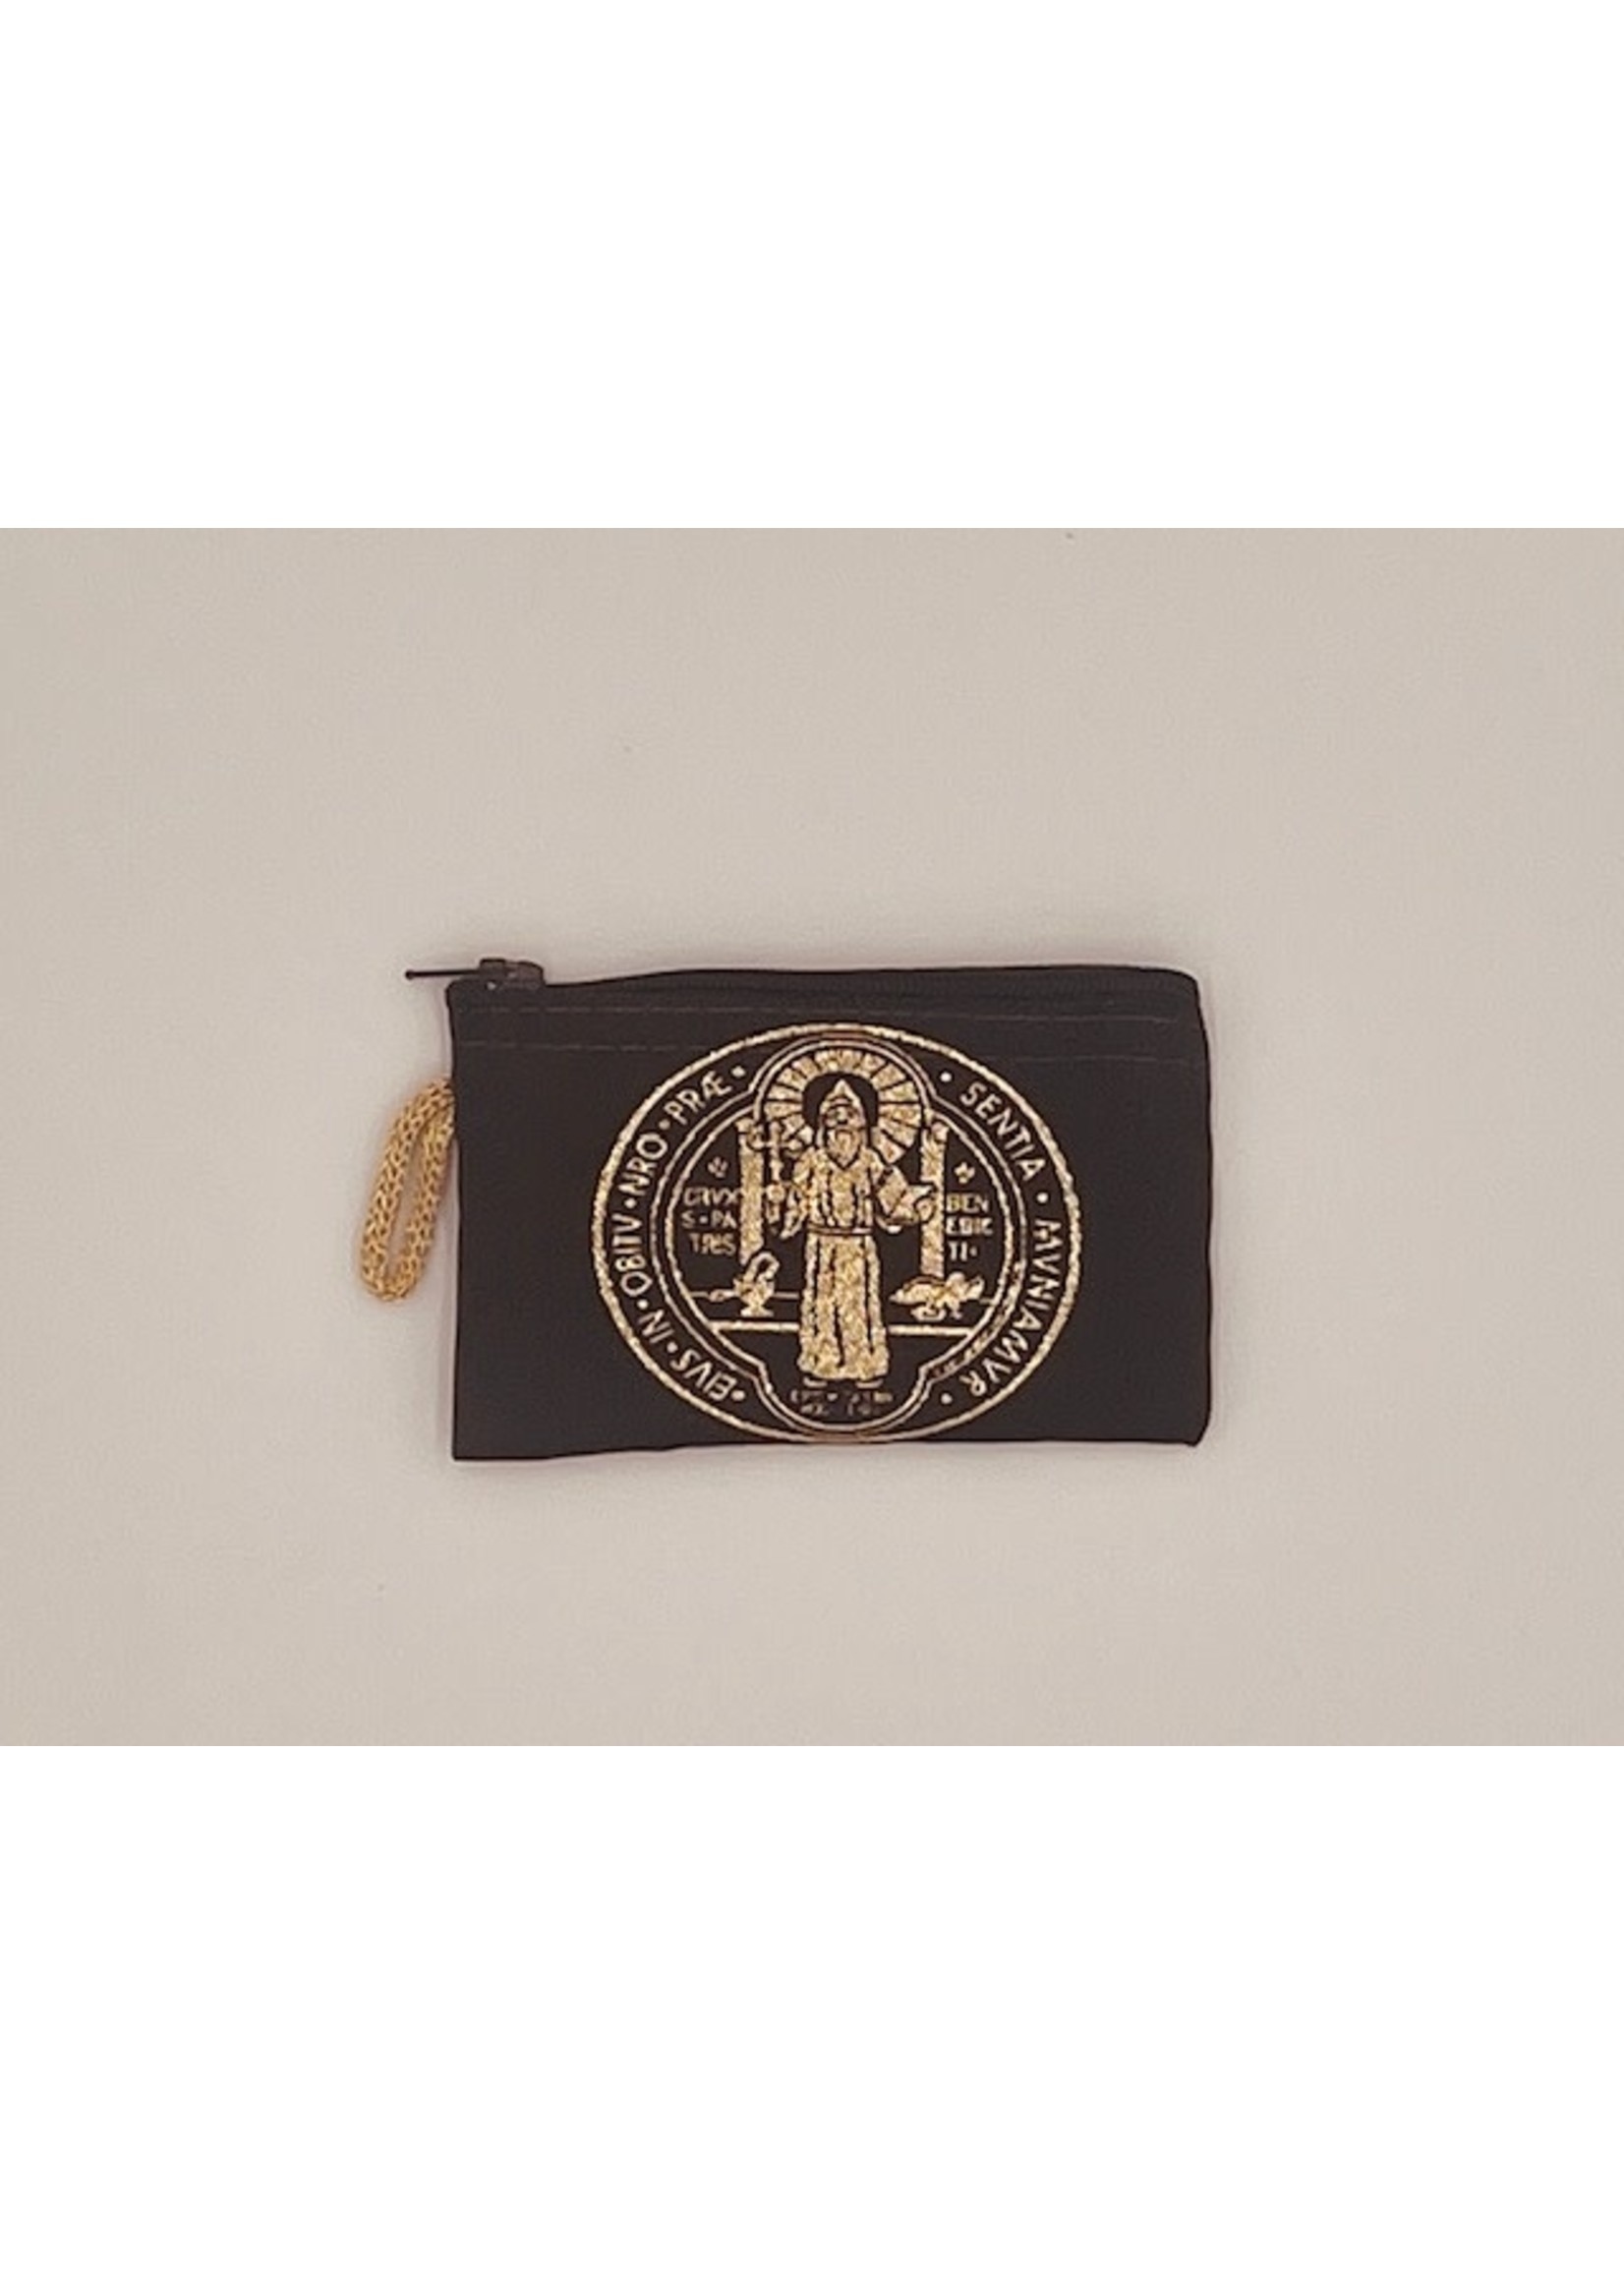 Saint Benedict Medal Rosary Pouch